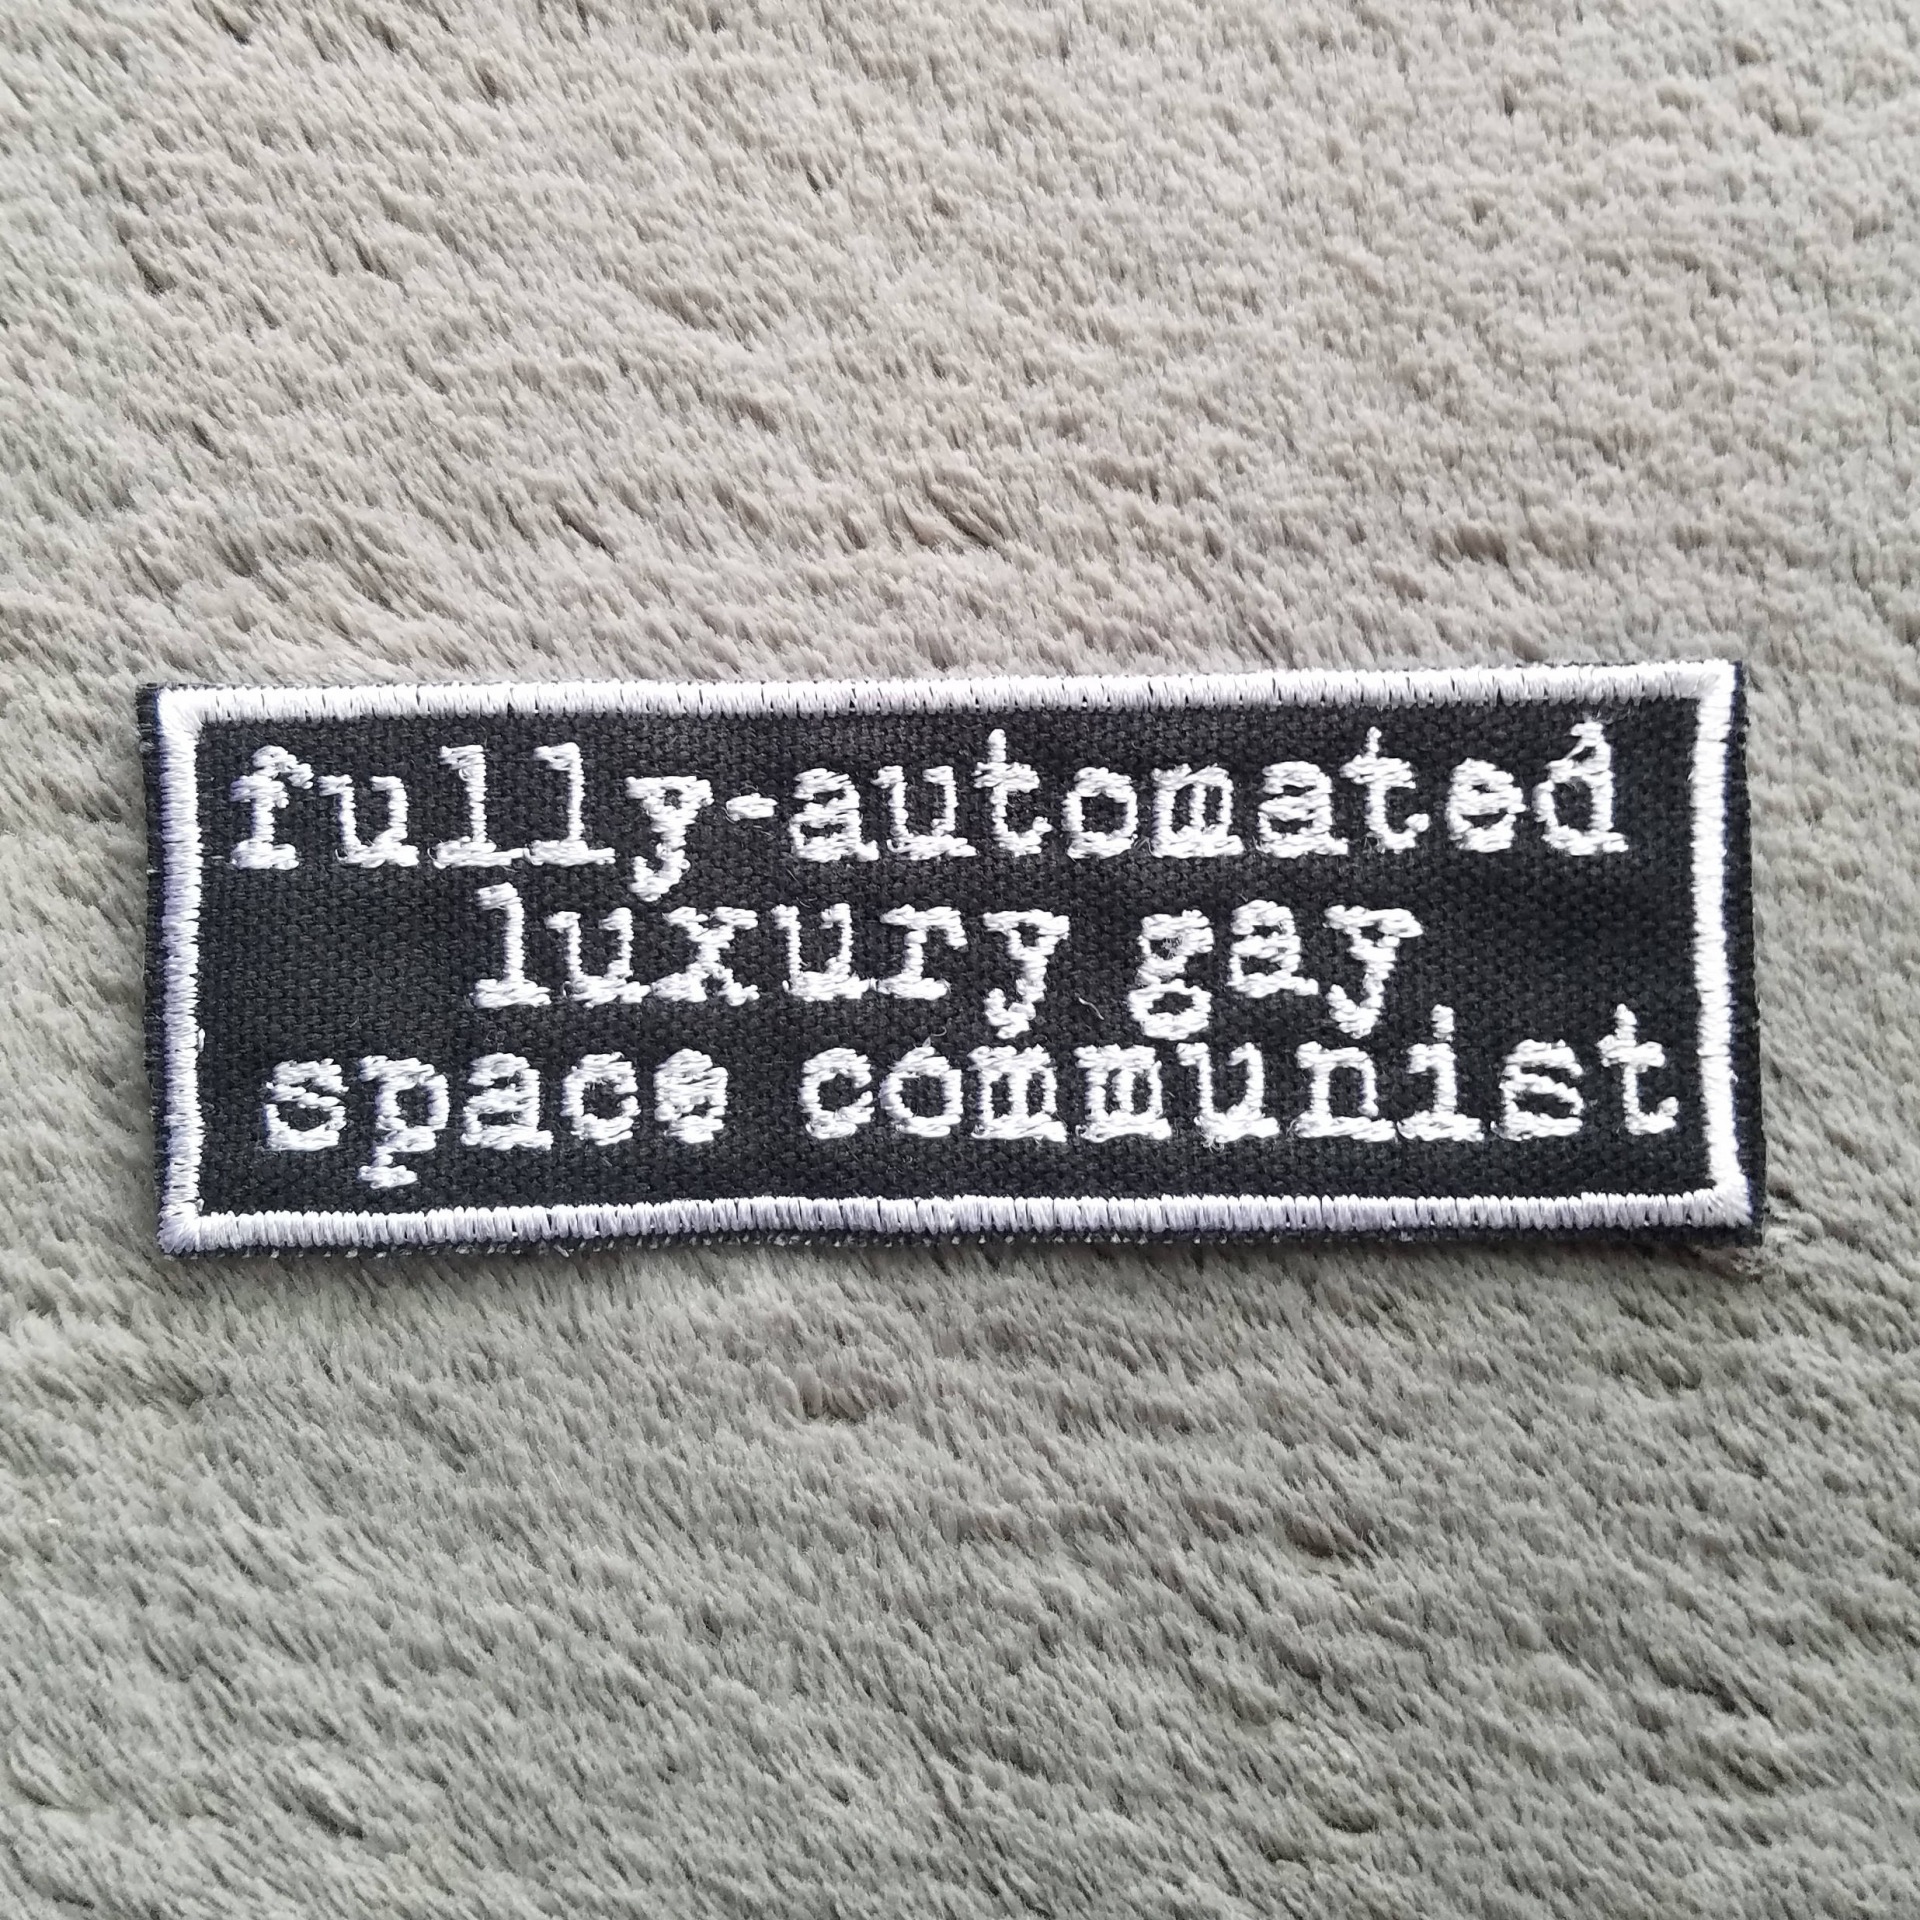 High Quality Fully automated luxury gay space communist Blank Meme Template